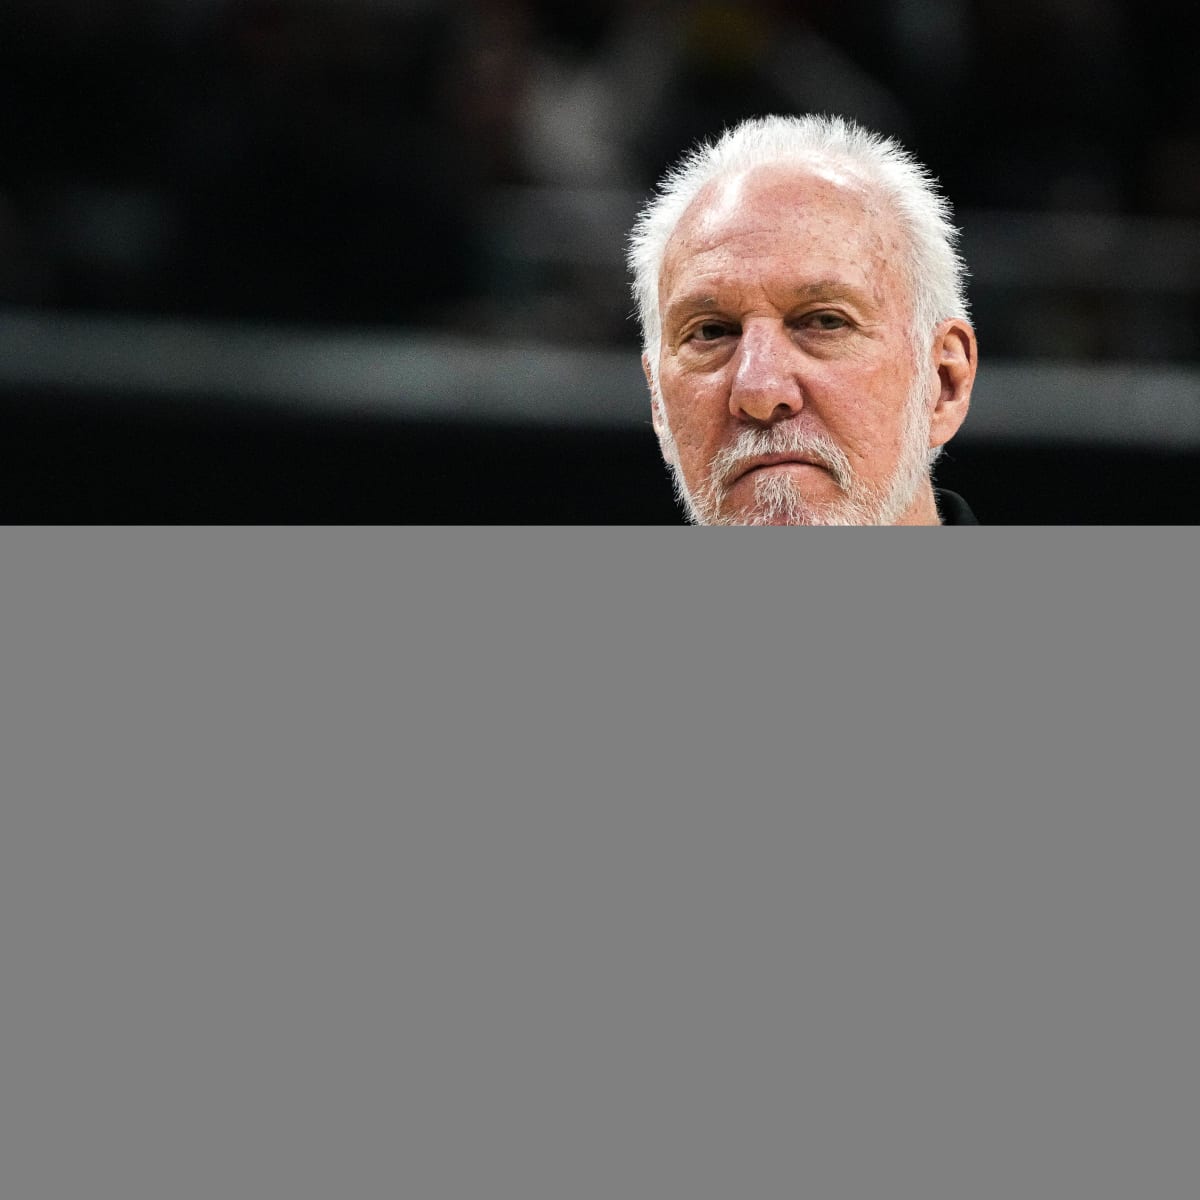 Ranking the San Antonio Spurs' top 7 trade assets for 2023–24